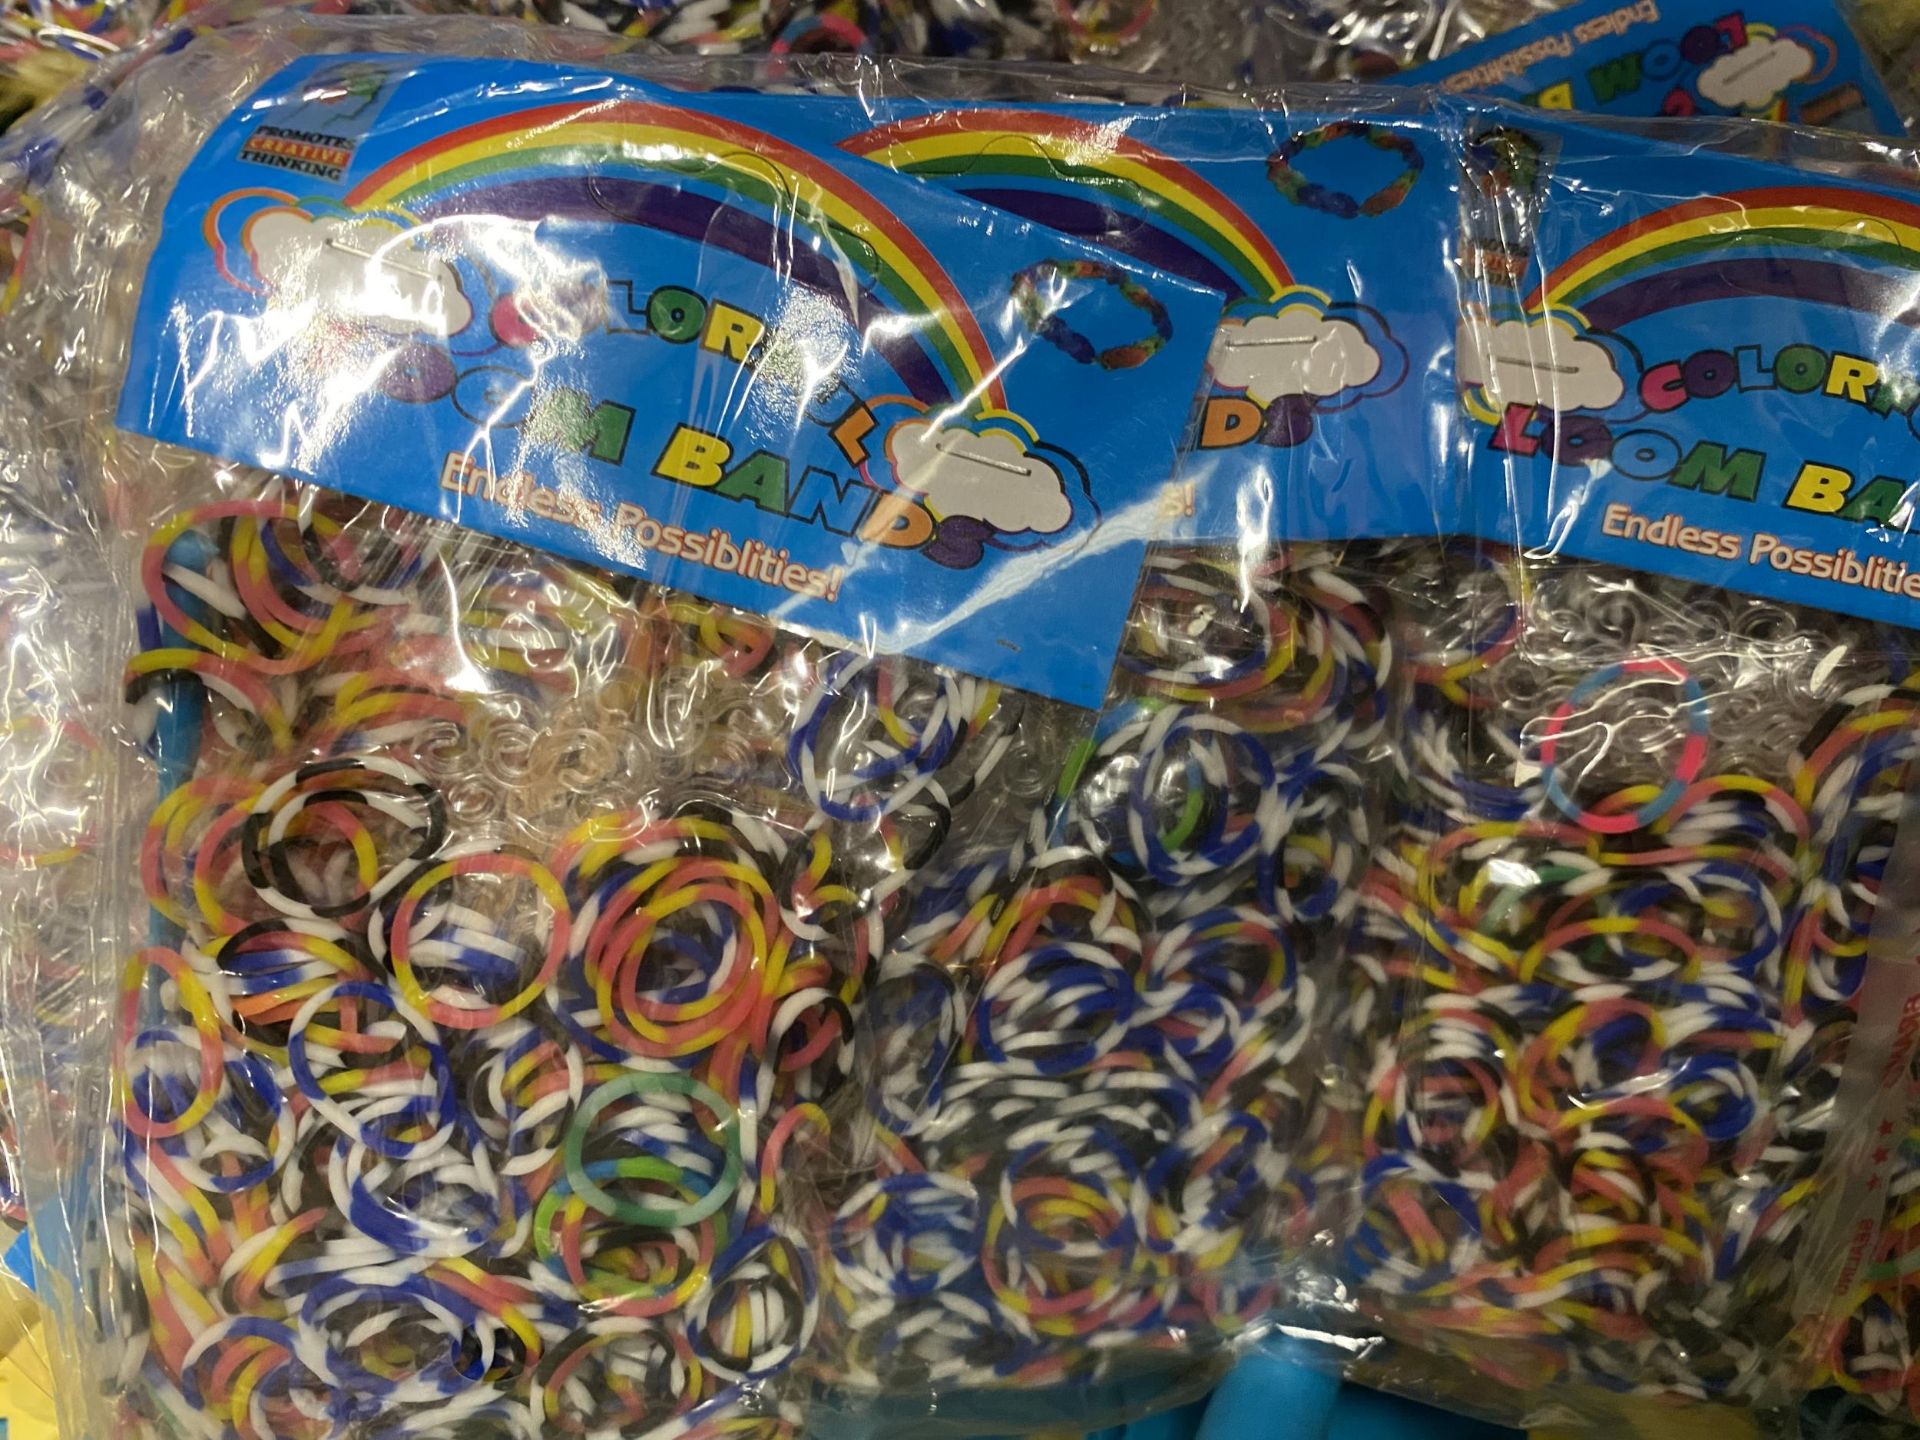 A BOX OF LOOM BANDS AND ACCESSORIES - Image 2 of 4